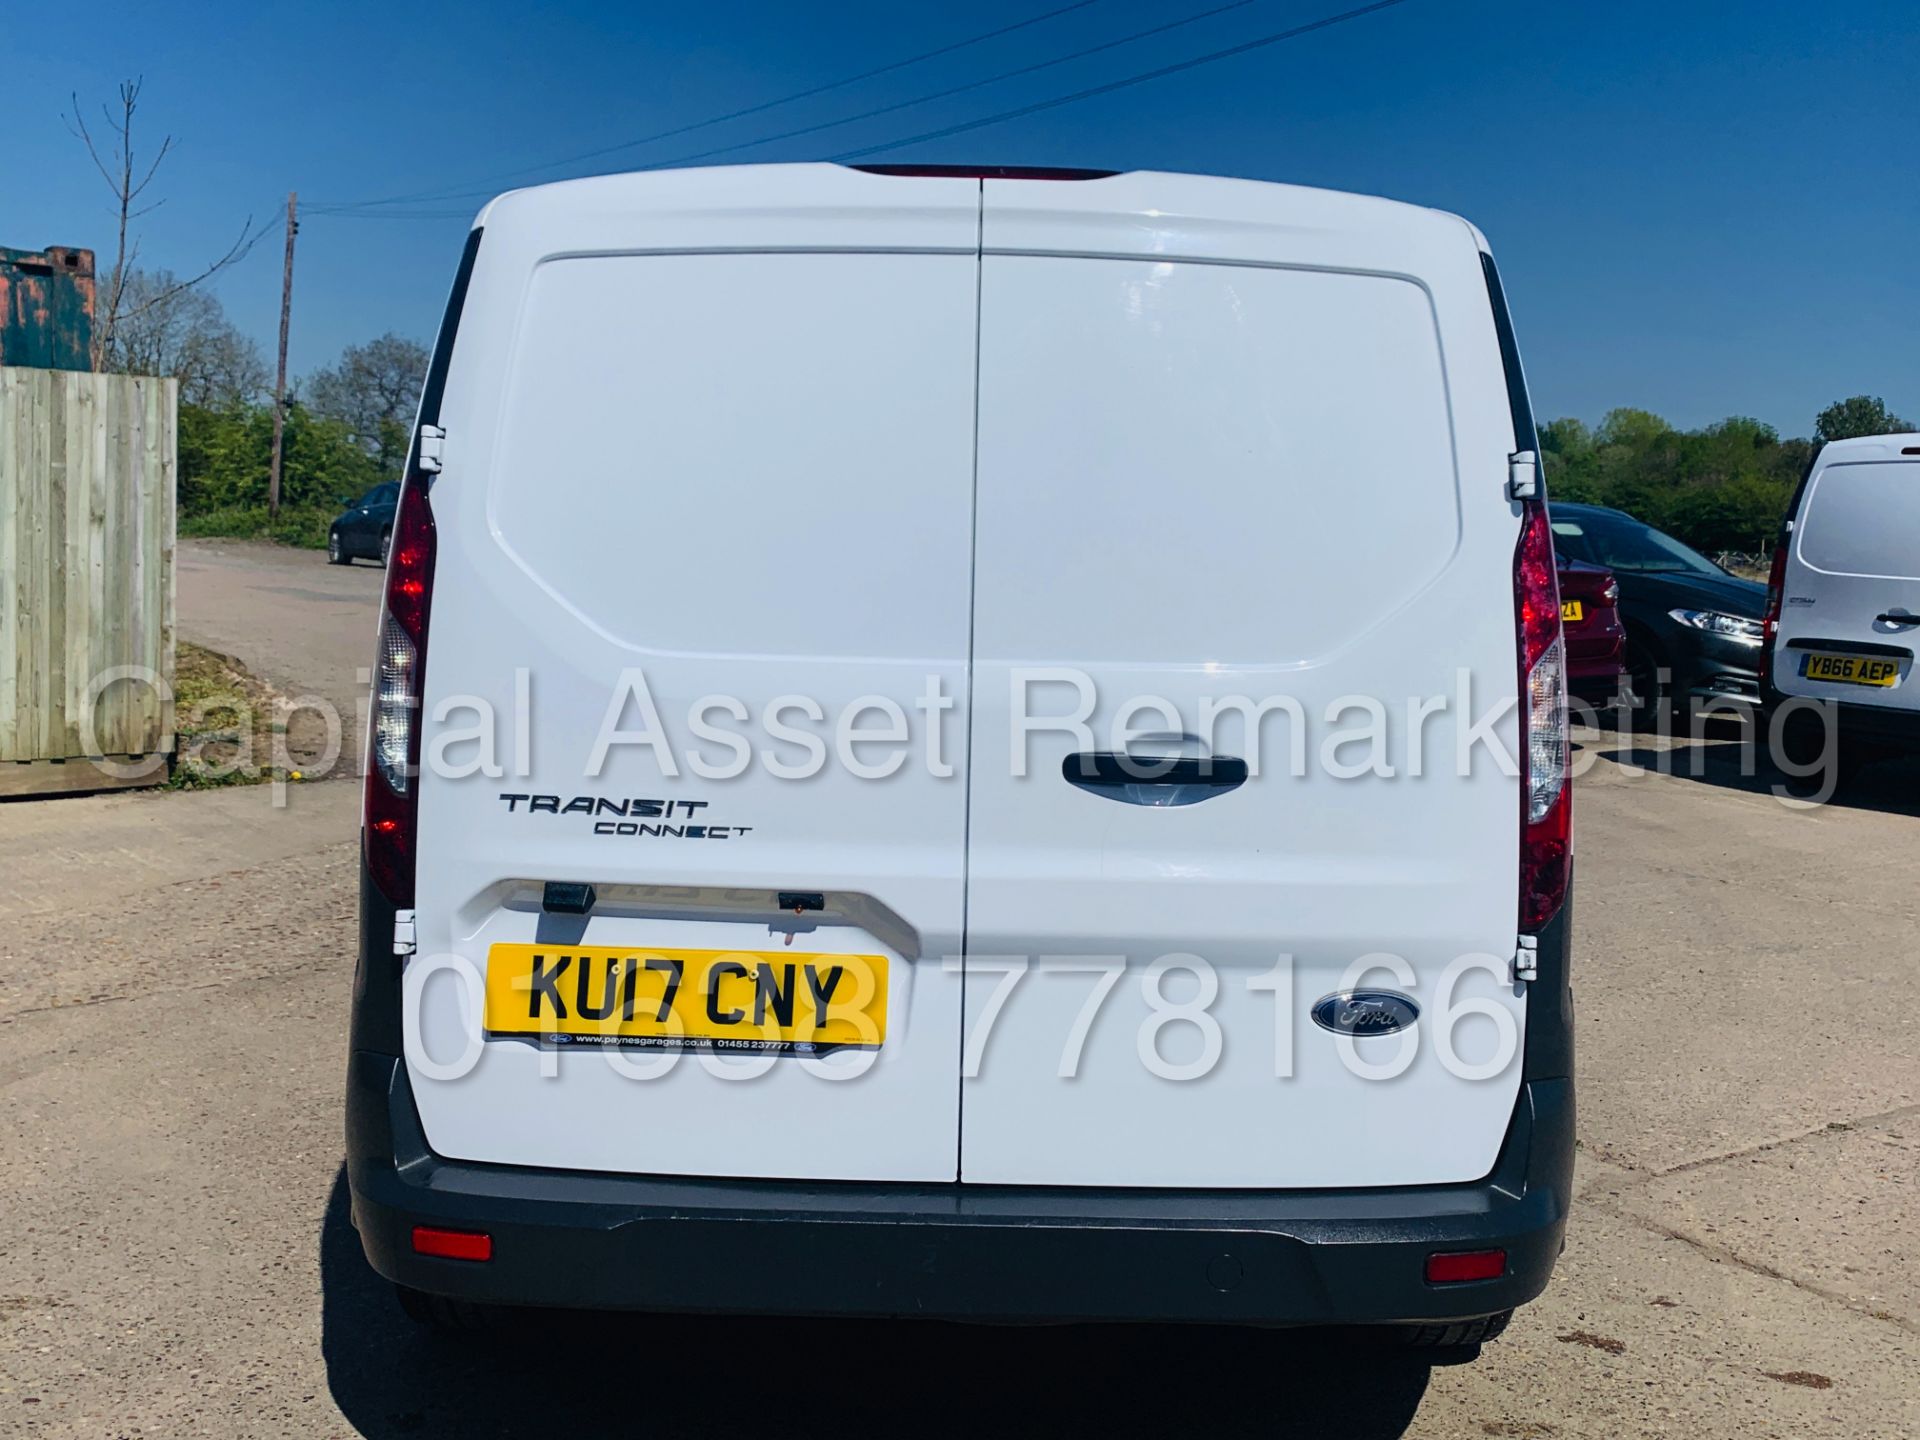 (On Sale) FORD TRANSIT CONNECT *SWB* (2017 - EURO 6) '1.5 TDCI - 6 SPEED' (1 OWNER - FULL HISTORY) - Image 7 of 38